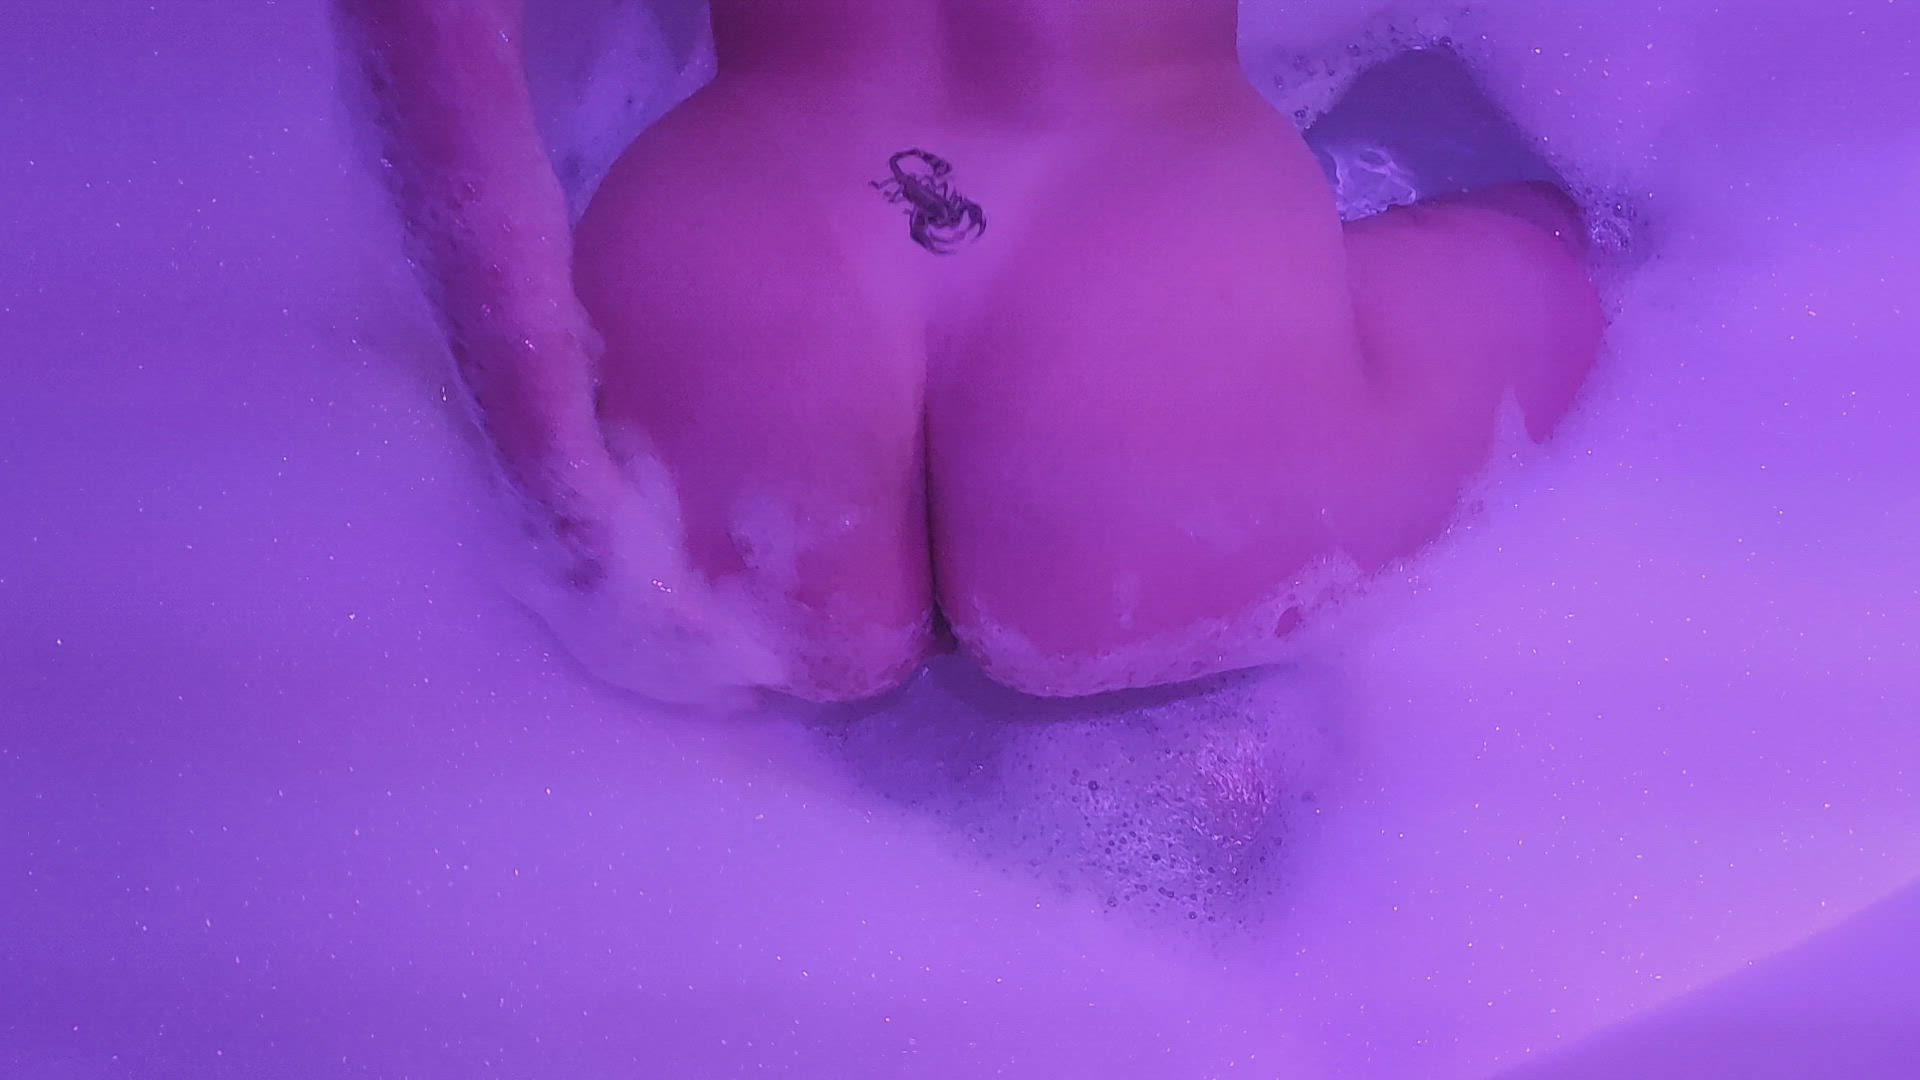 Bathtub porn video with onlyfans model dirty-pawg <strong>@dirty-pawg</strong>